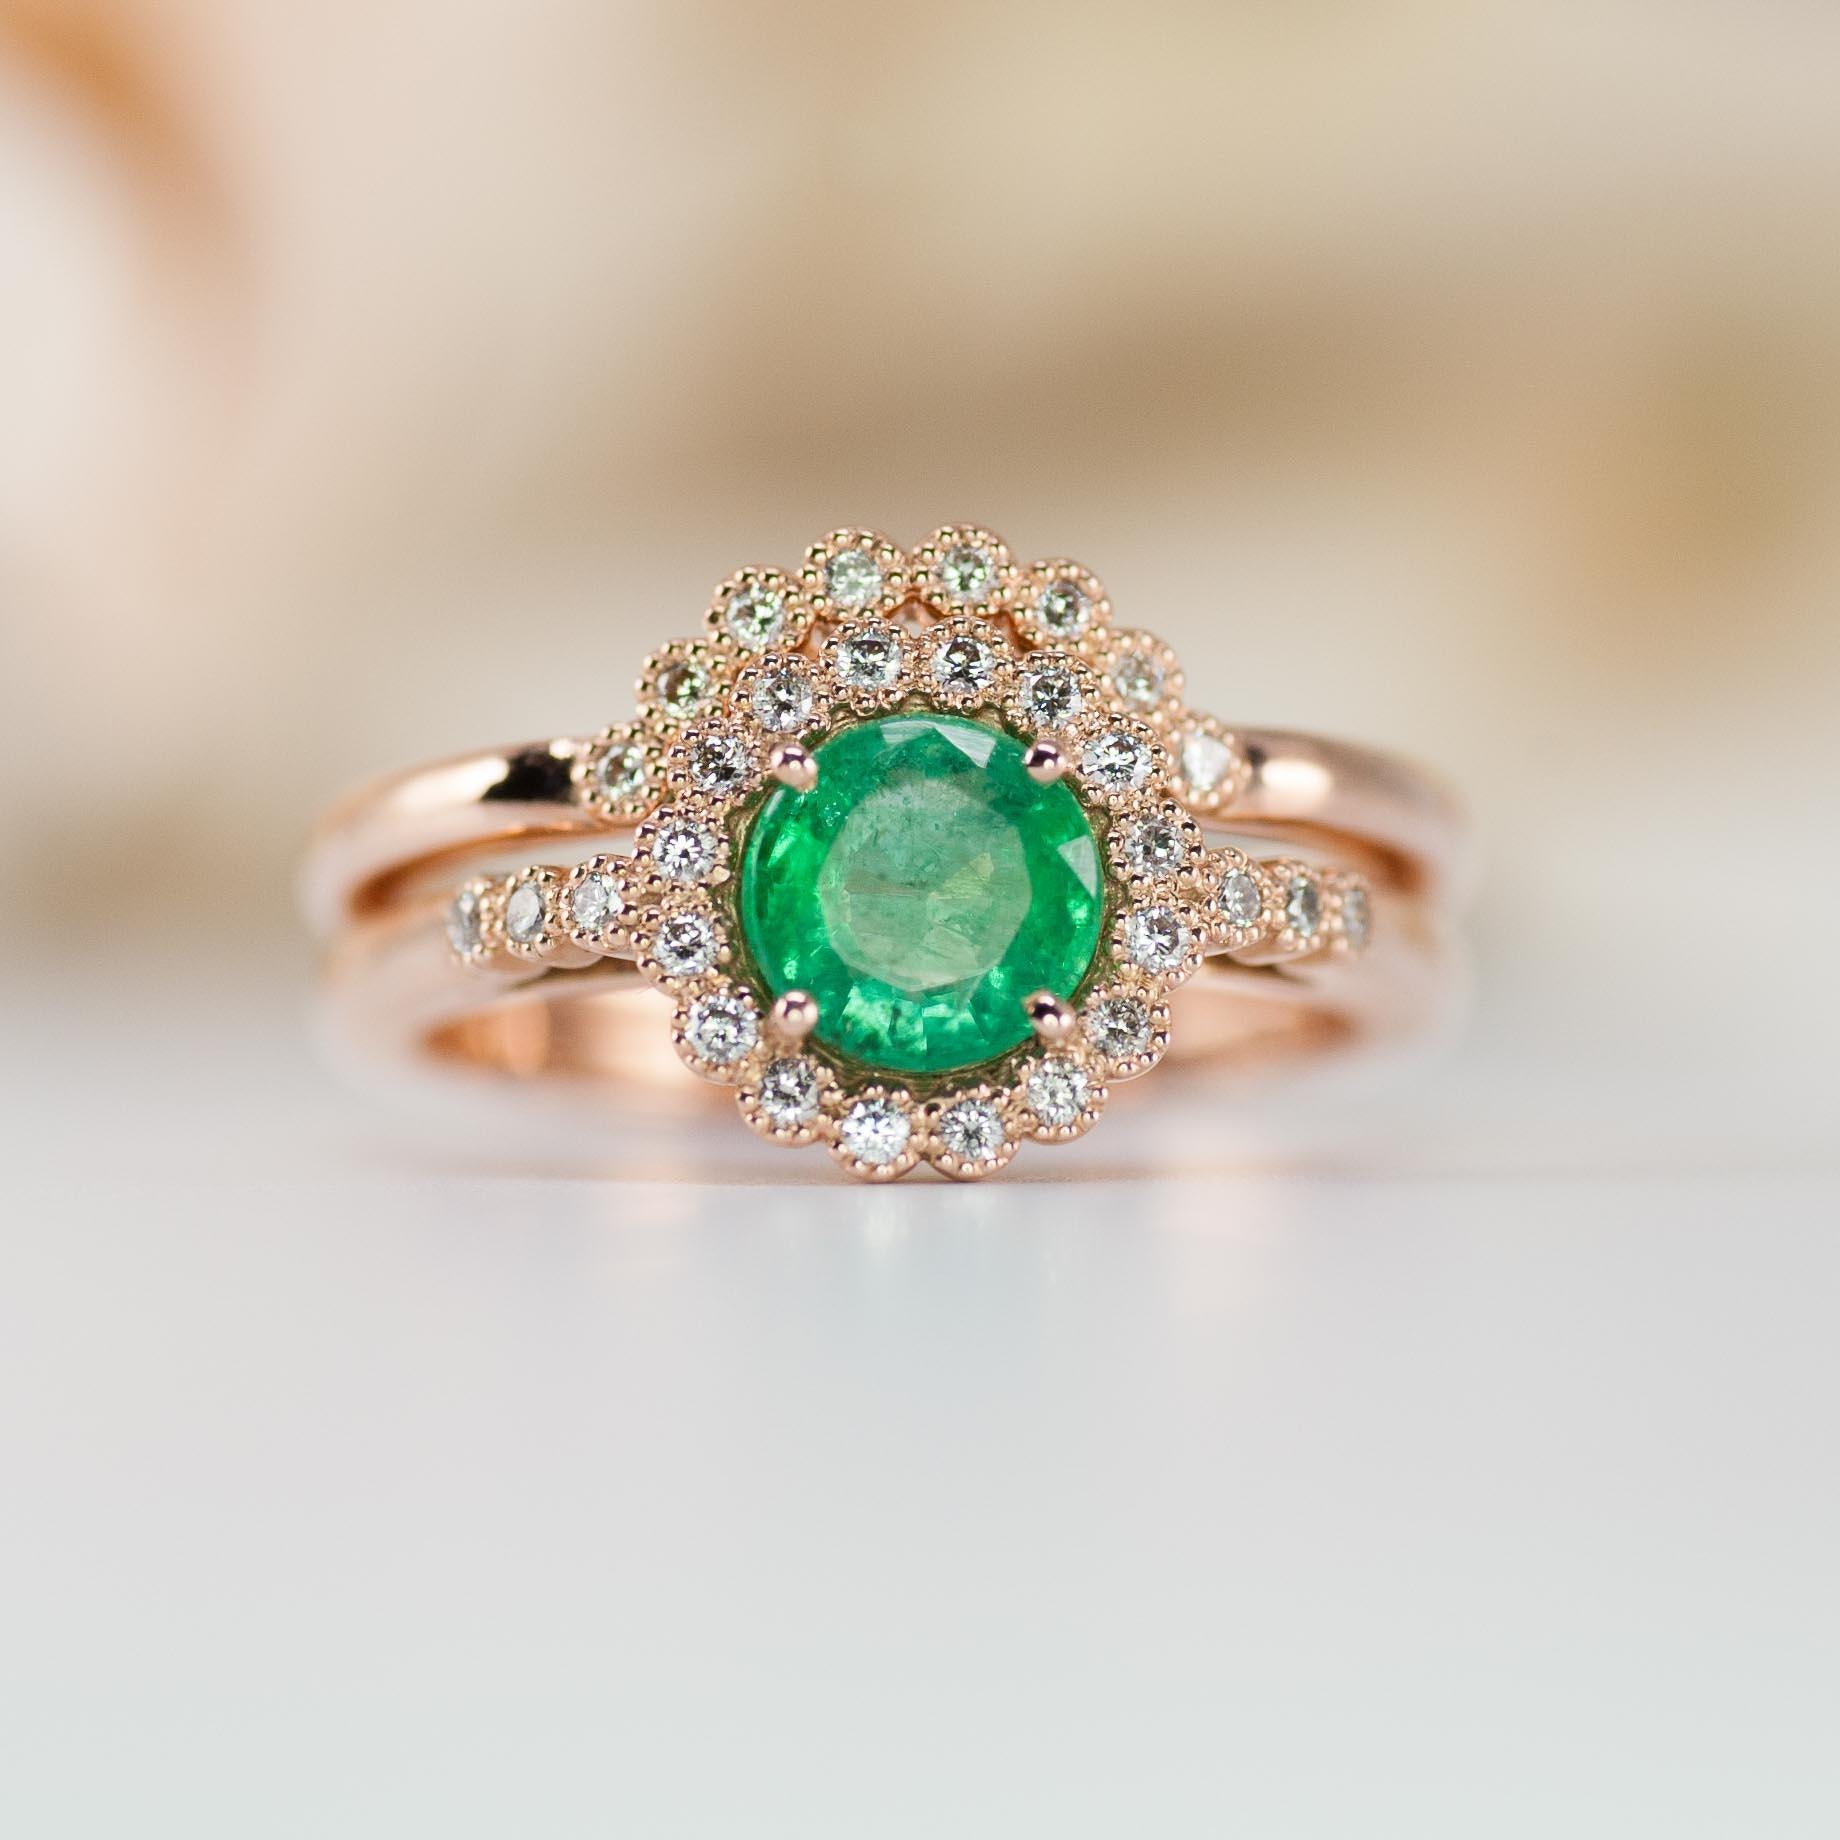 Vintage Emerald Engagement Ring, Rose Gold, Halo Engagement Ring In New Condition For Sale In Mission Viejo, CA